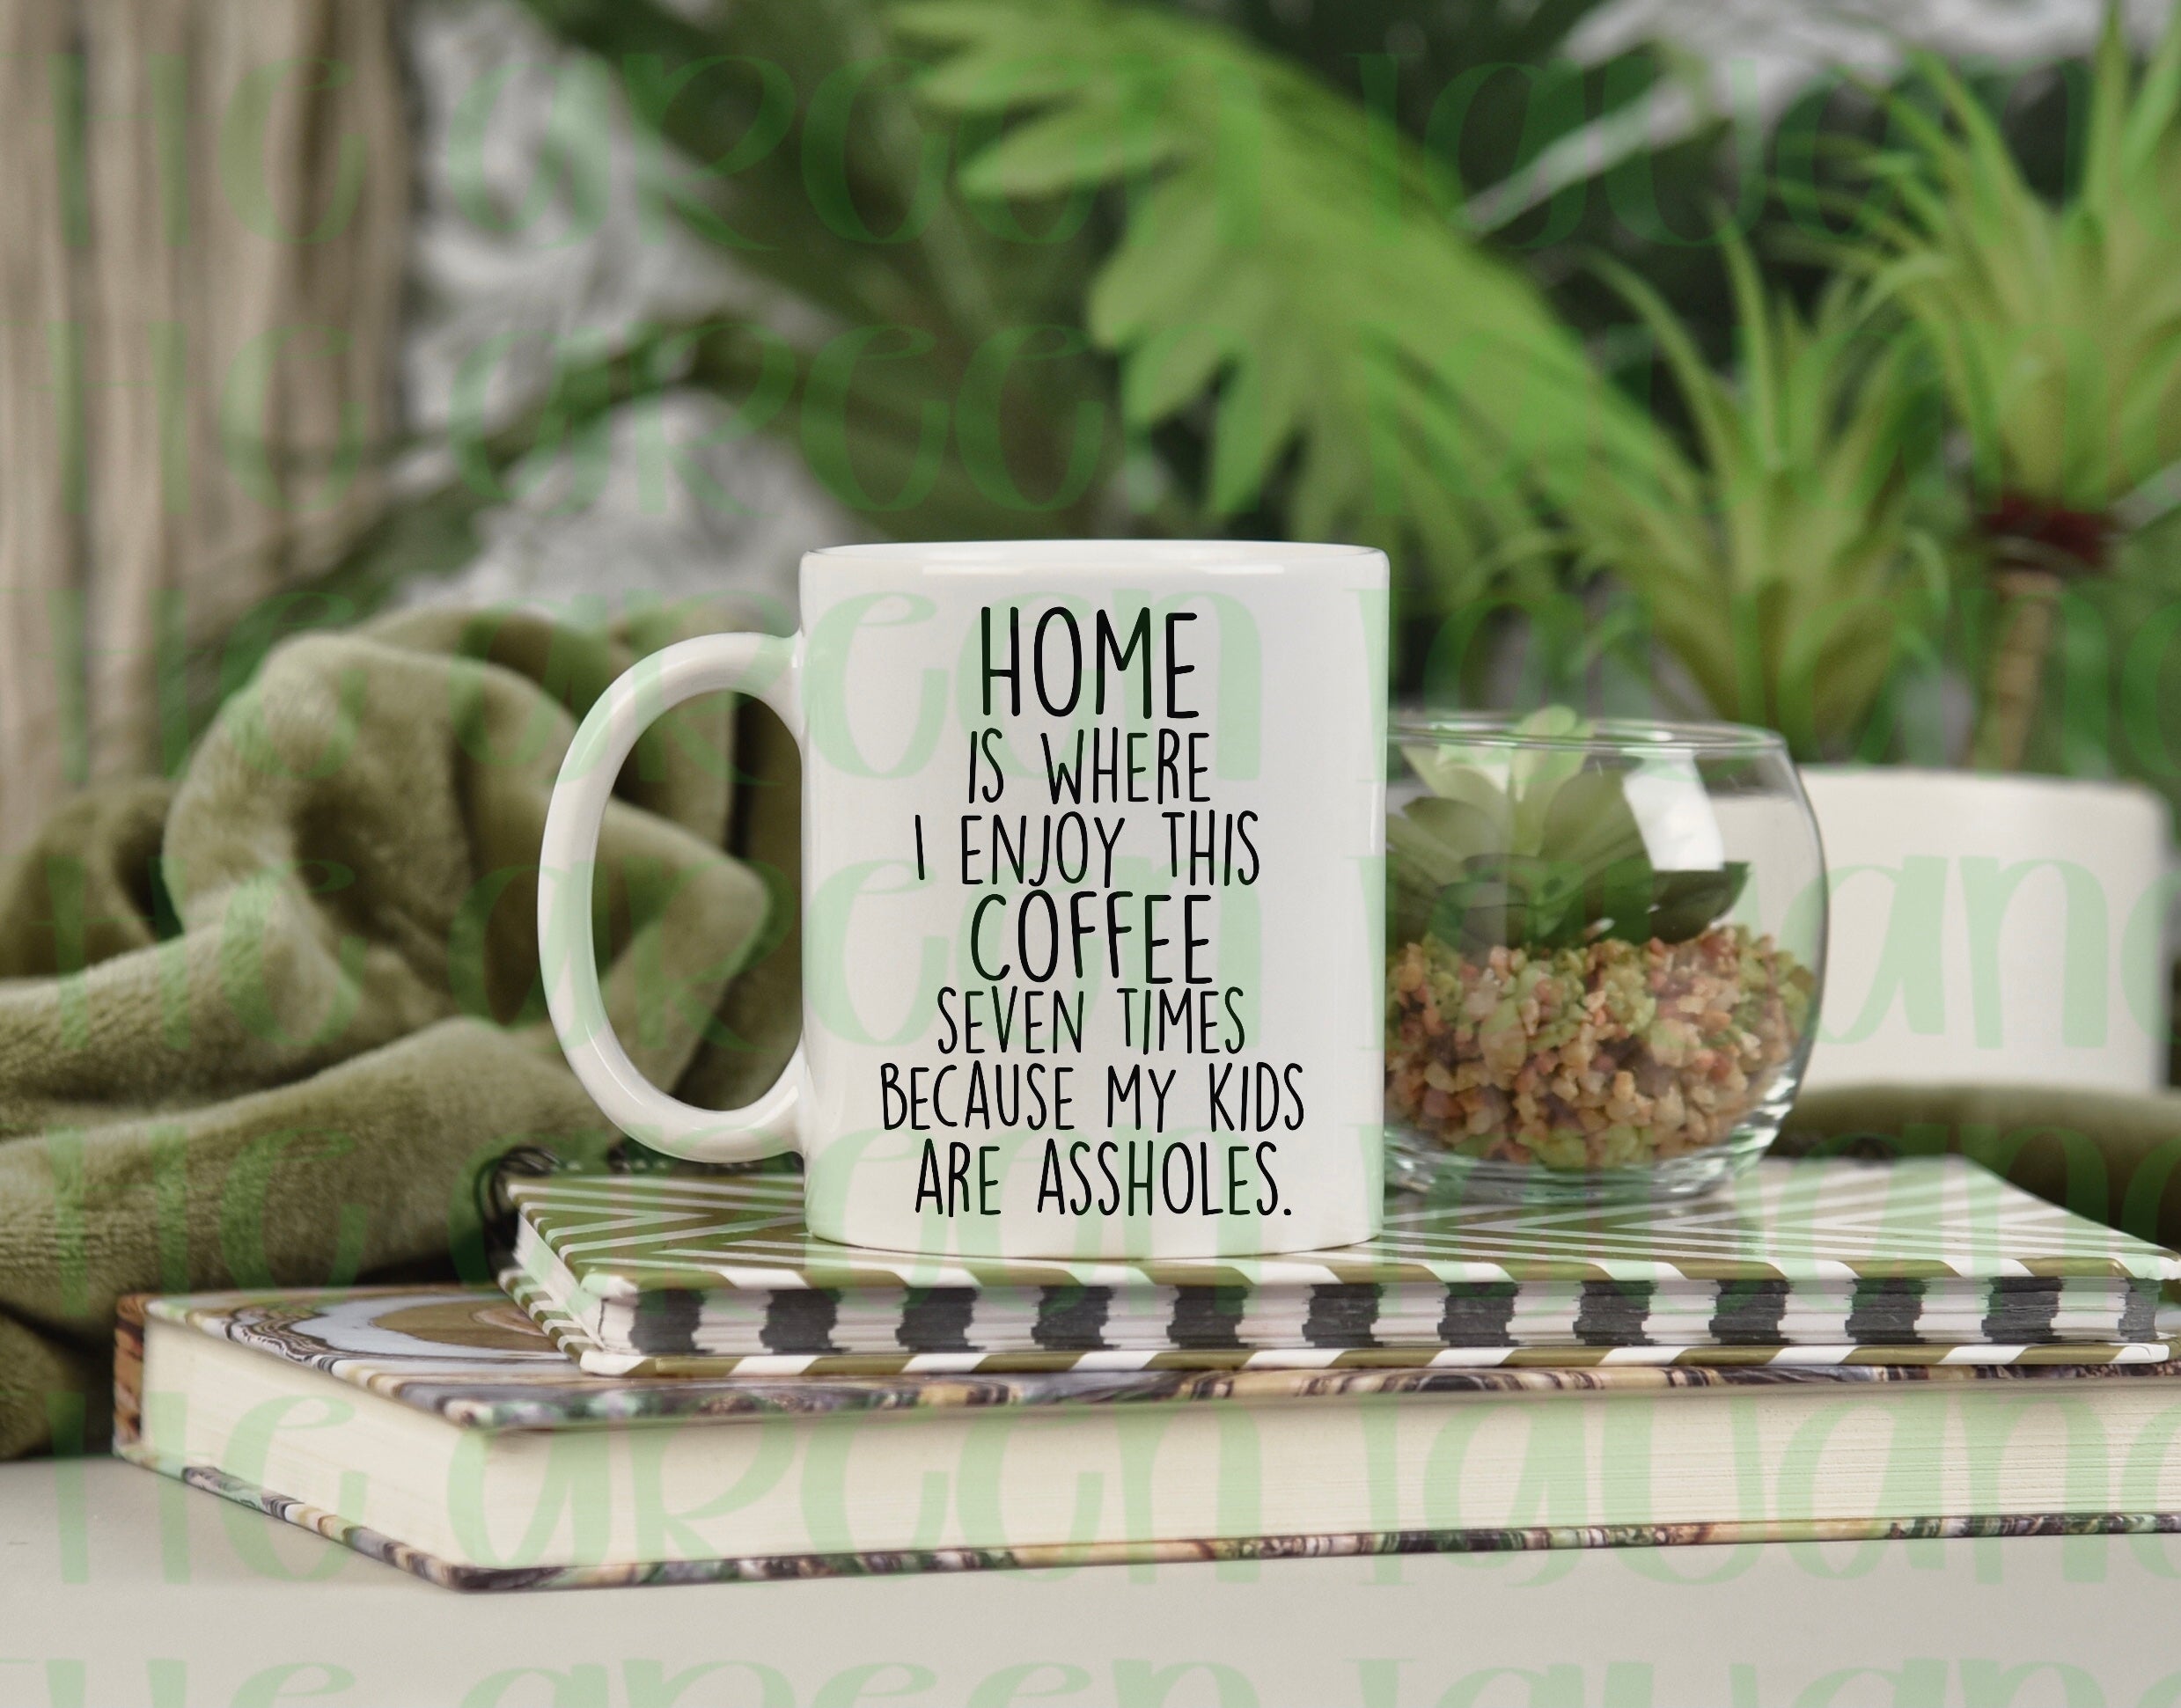 Home is where I enjoy this coffee seven times because my kids are assholes. - DIGITAL